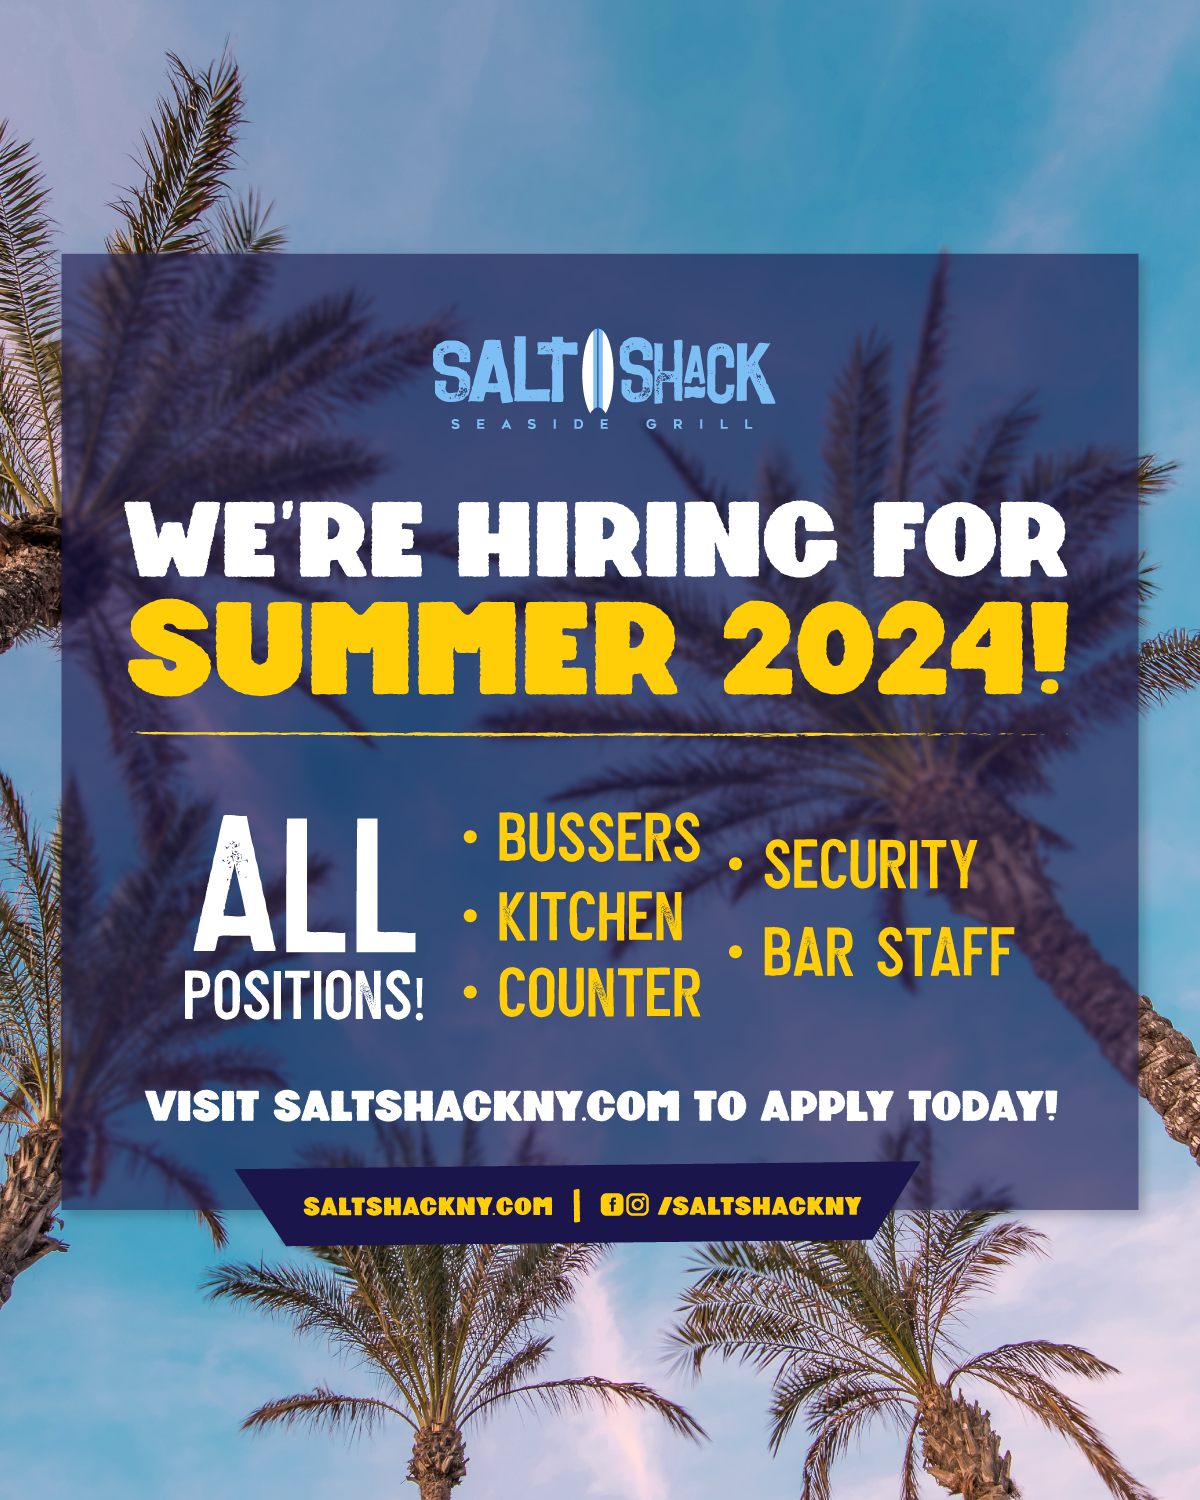 Hiring for Summer 2024! All Positions available! Apply through our website today!